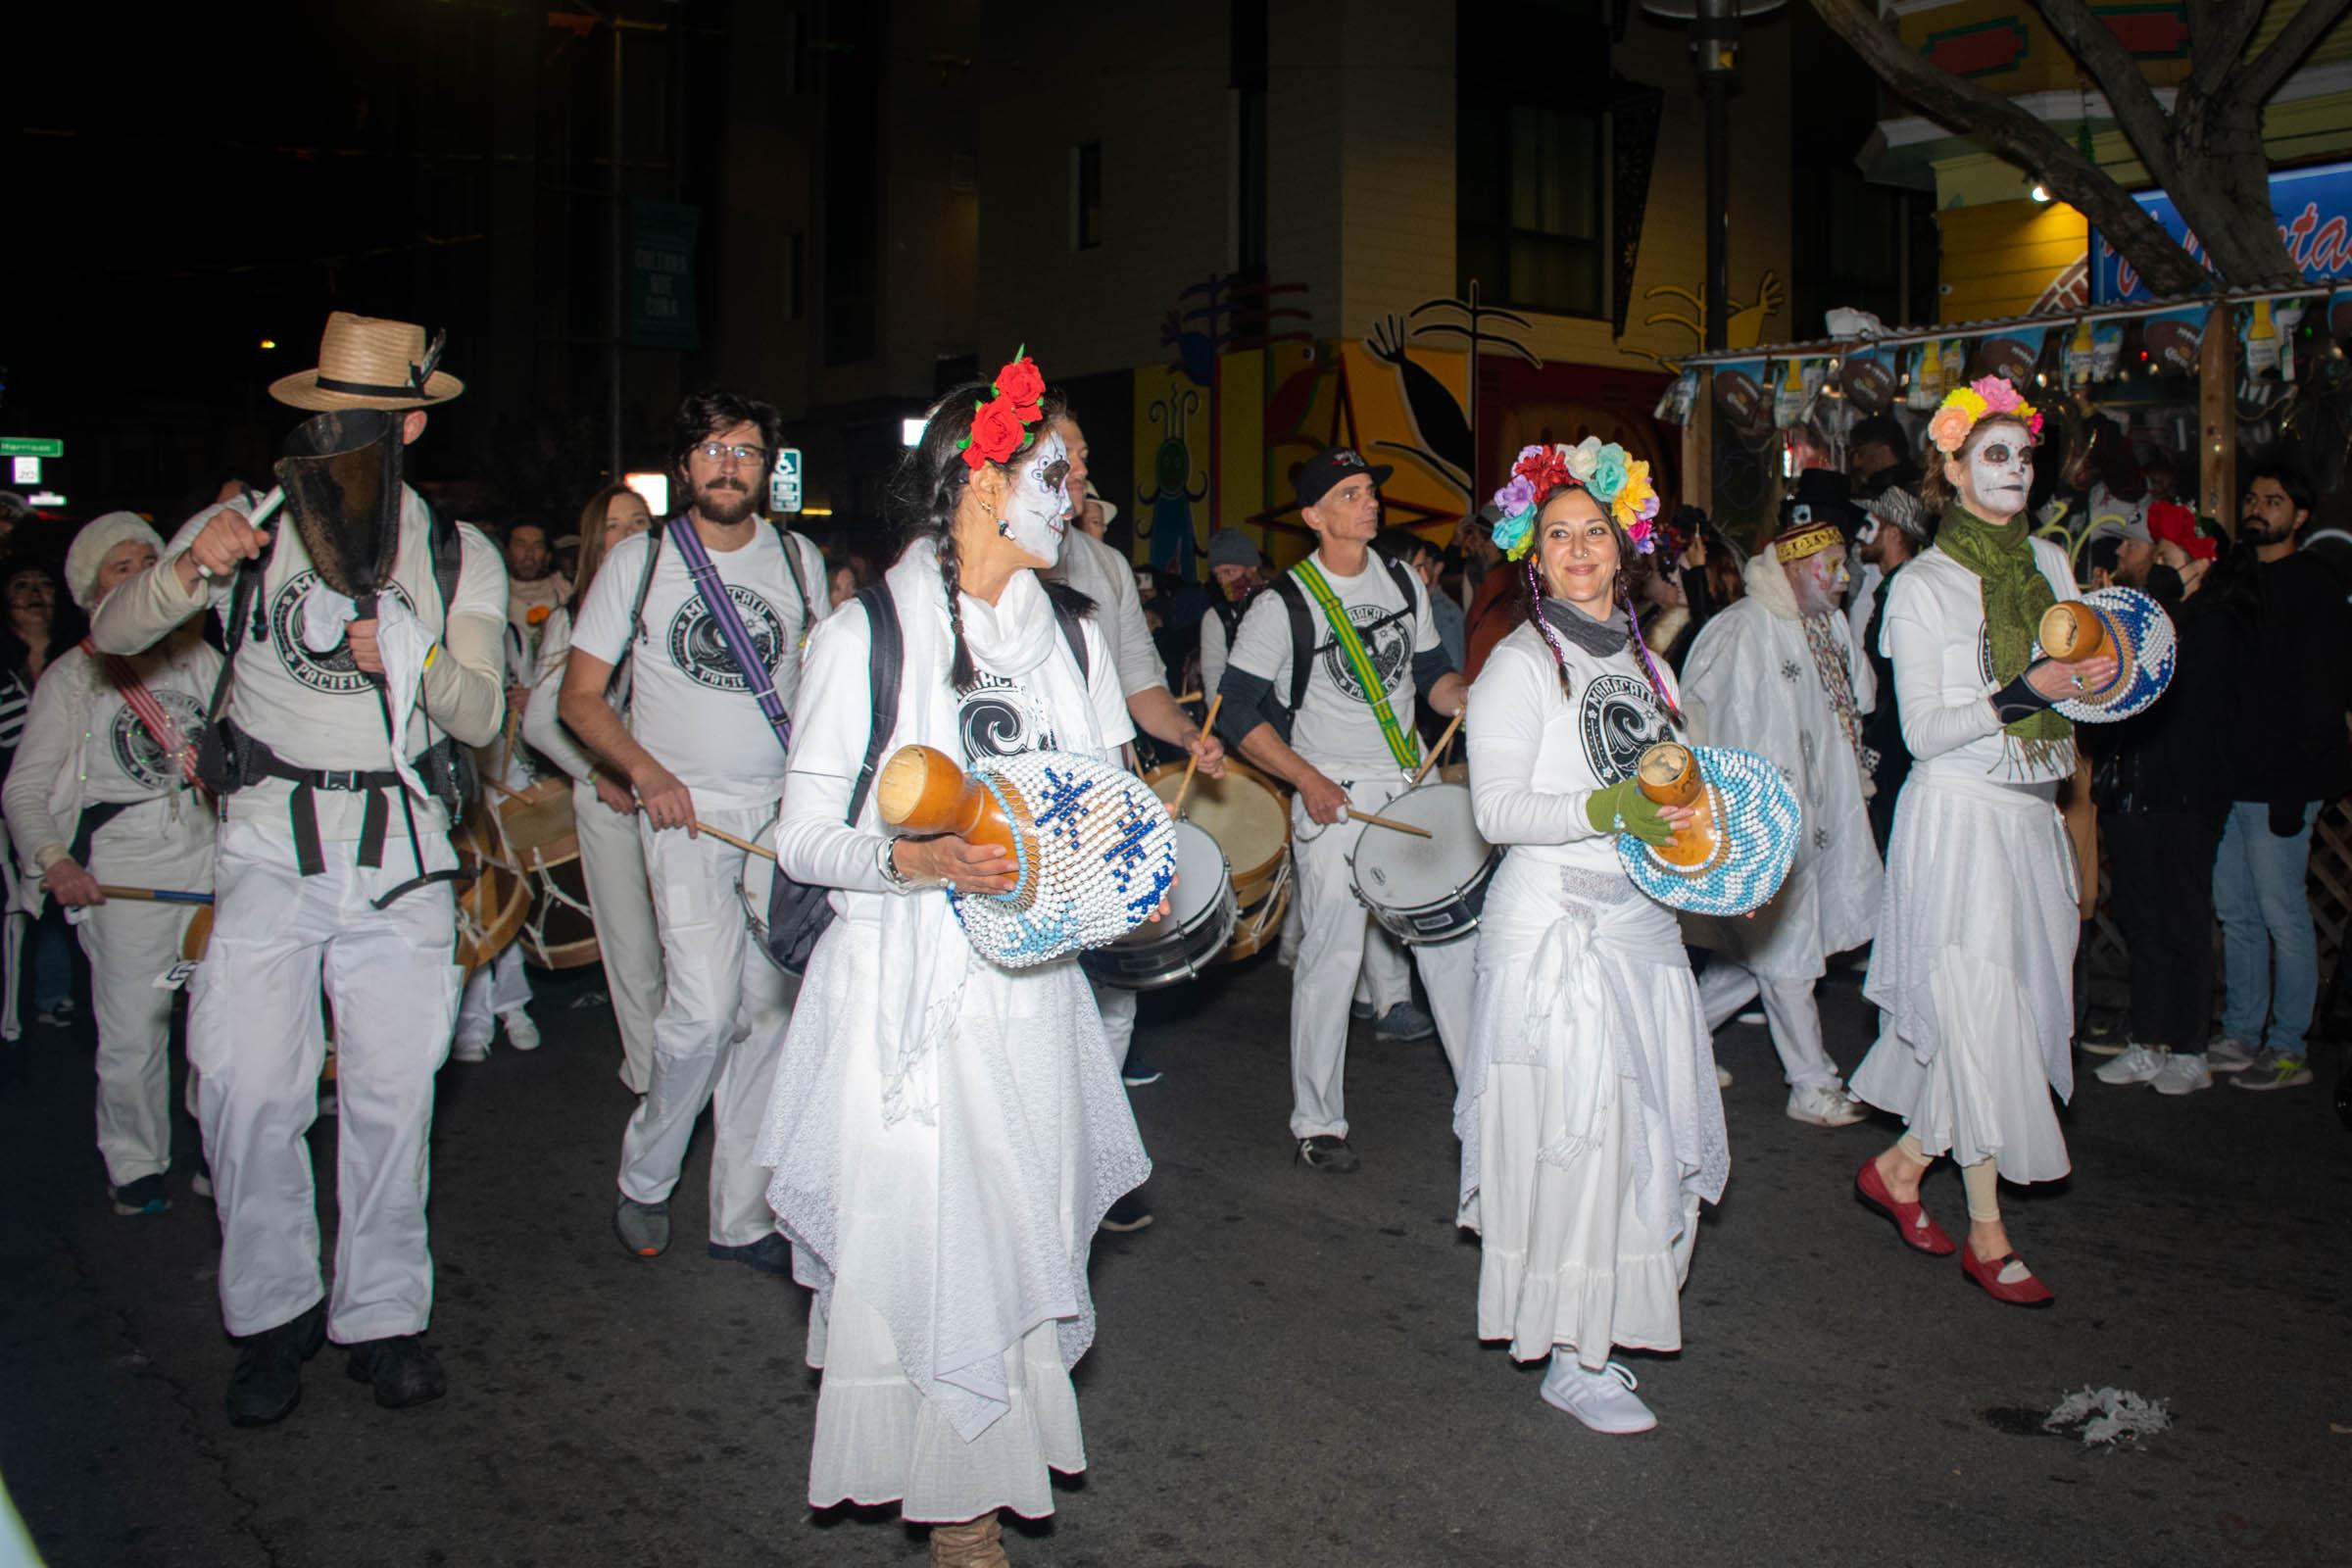 Day of the Dead Celebration - Musicians of Maracatu Pacifico joined the Day of the Dead...